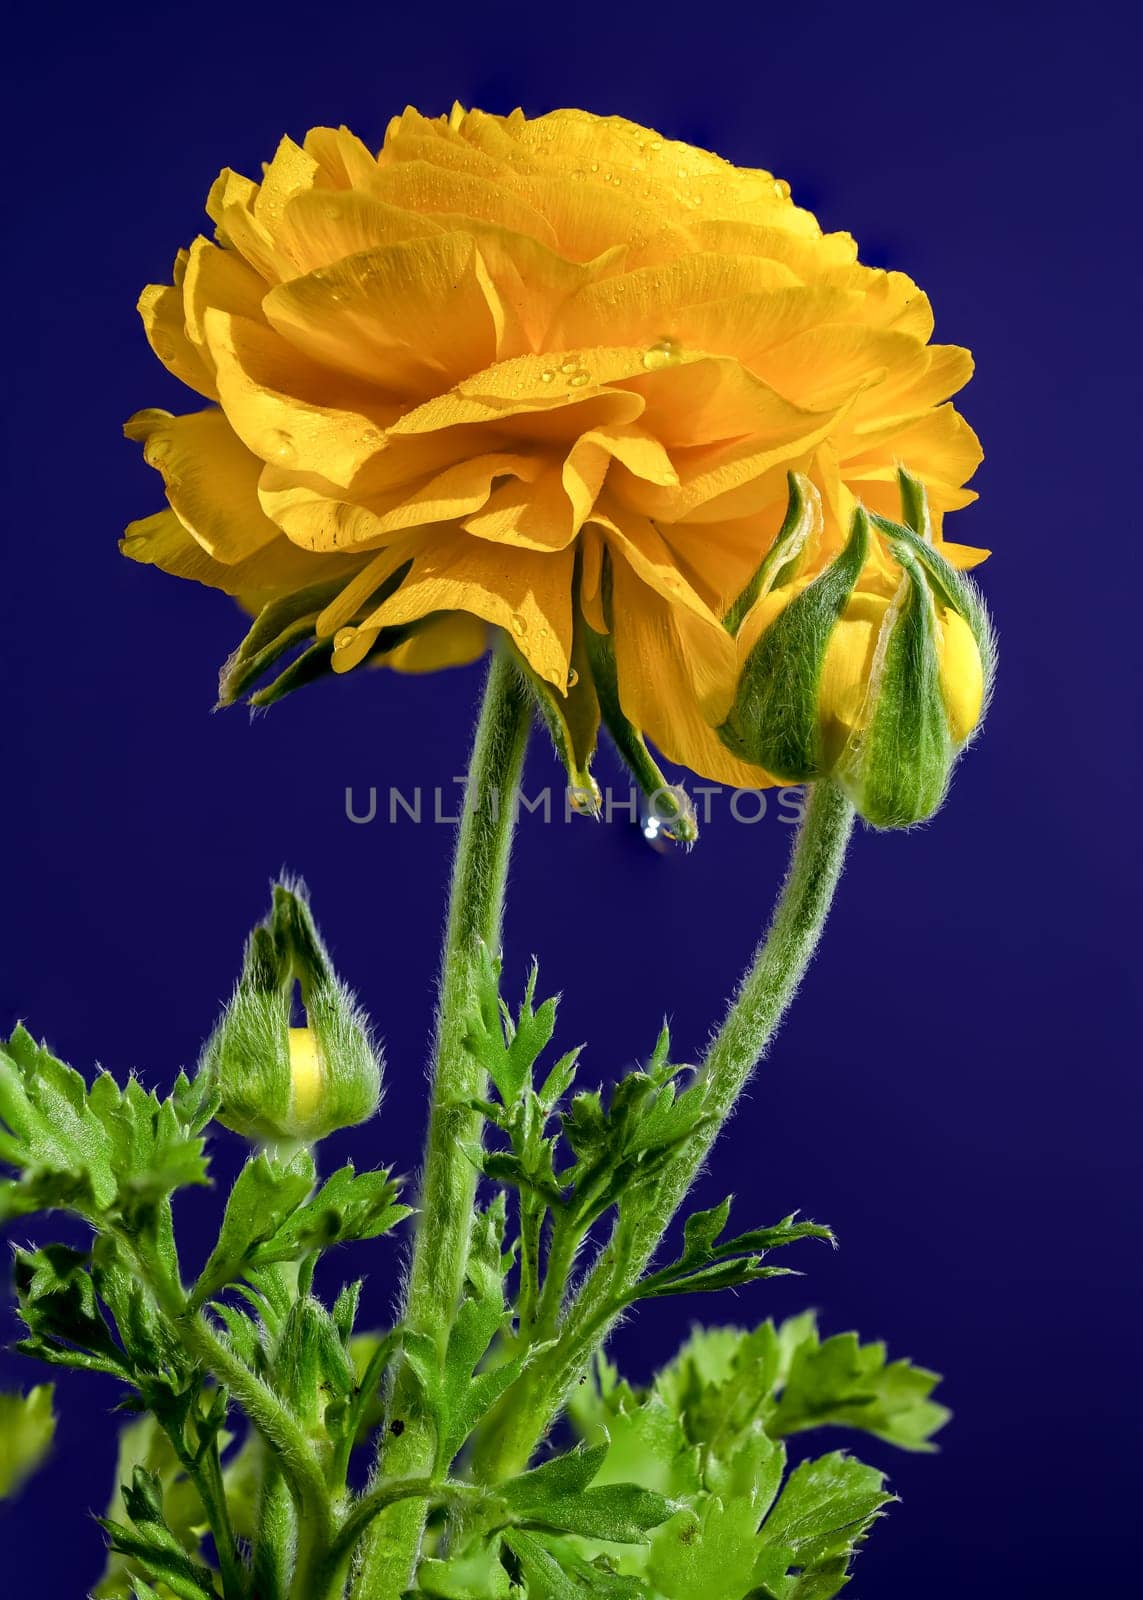 Yellow ranunculus flower on a blue background by Multipedia